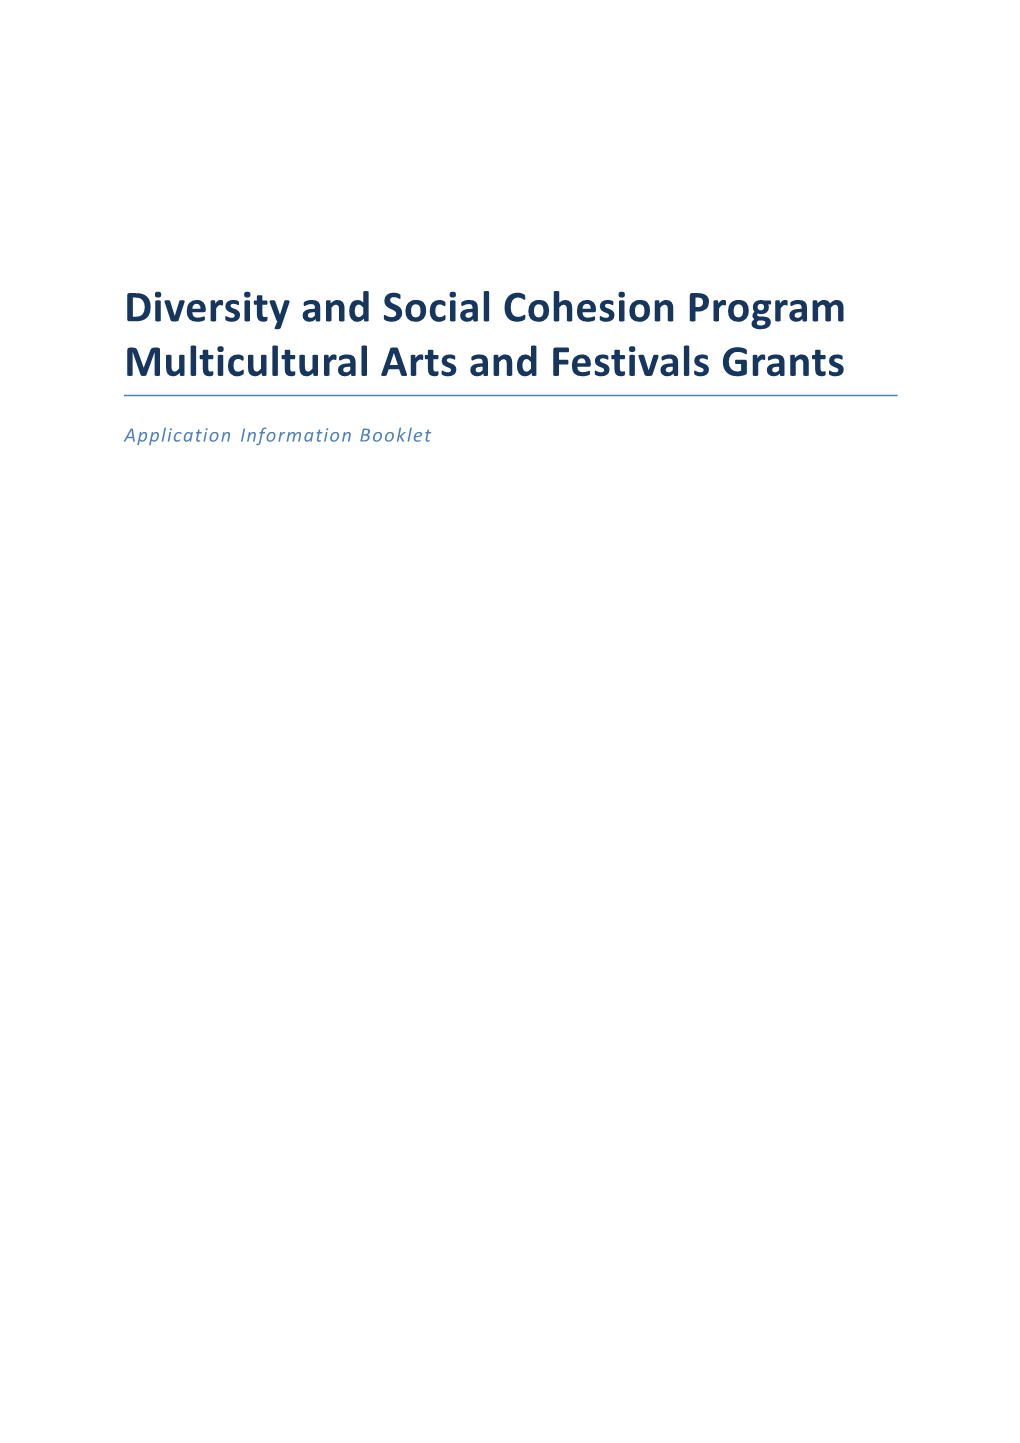 Diversity and Social Cohesion Program